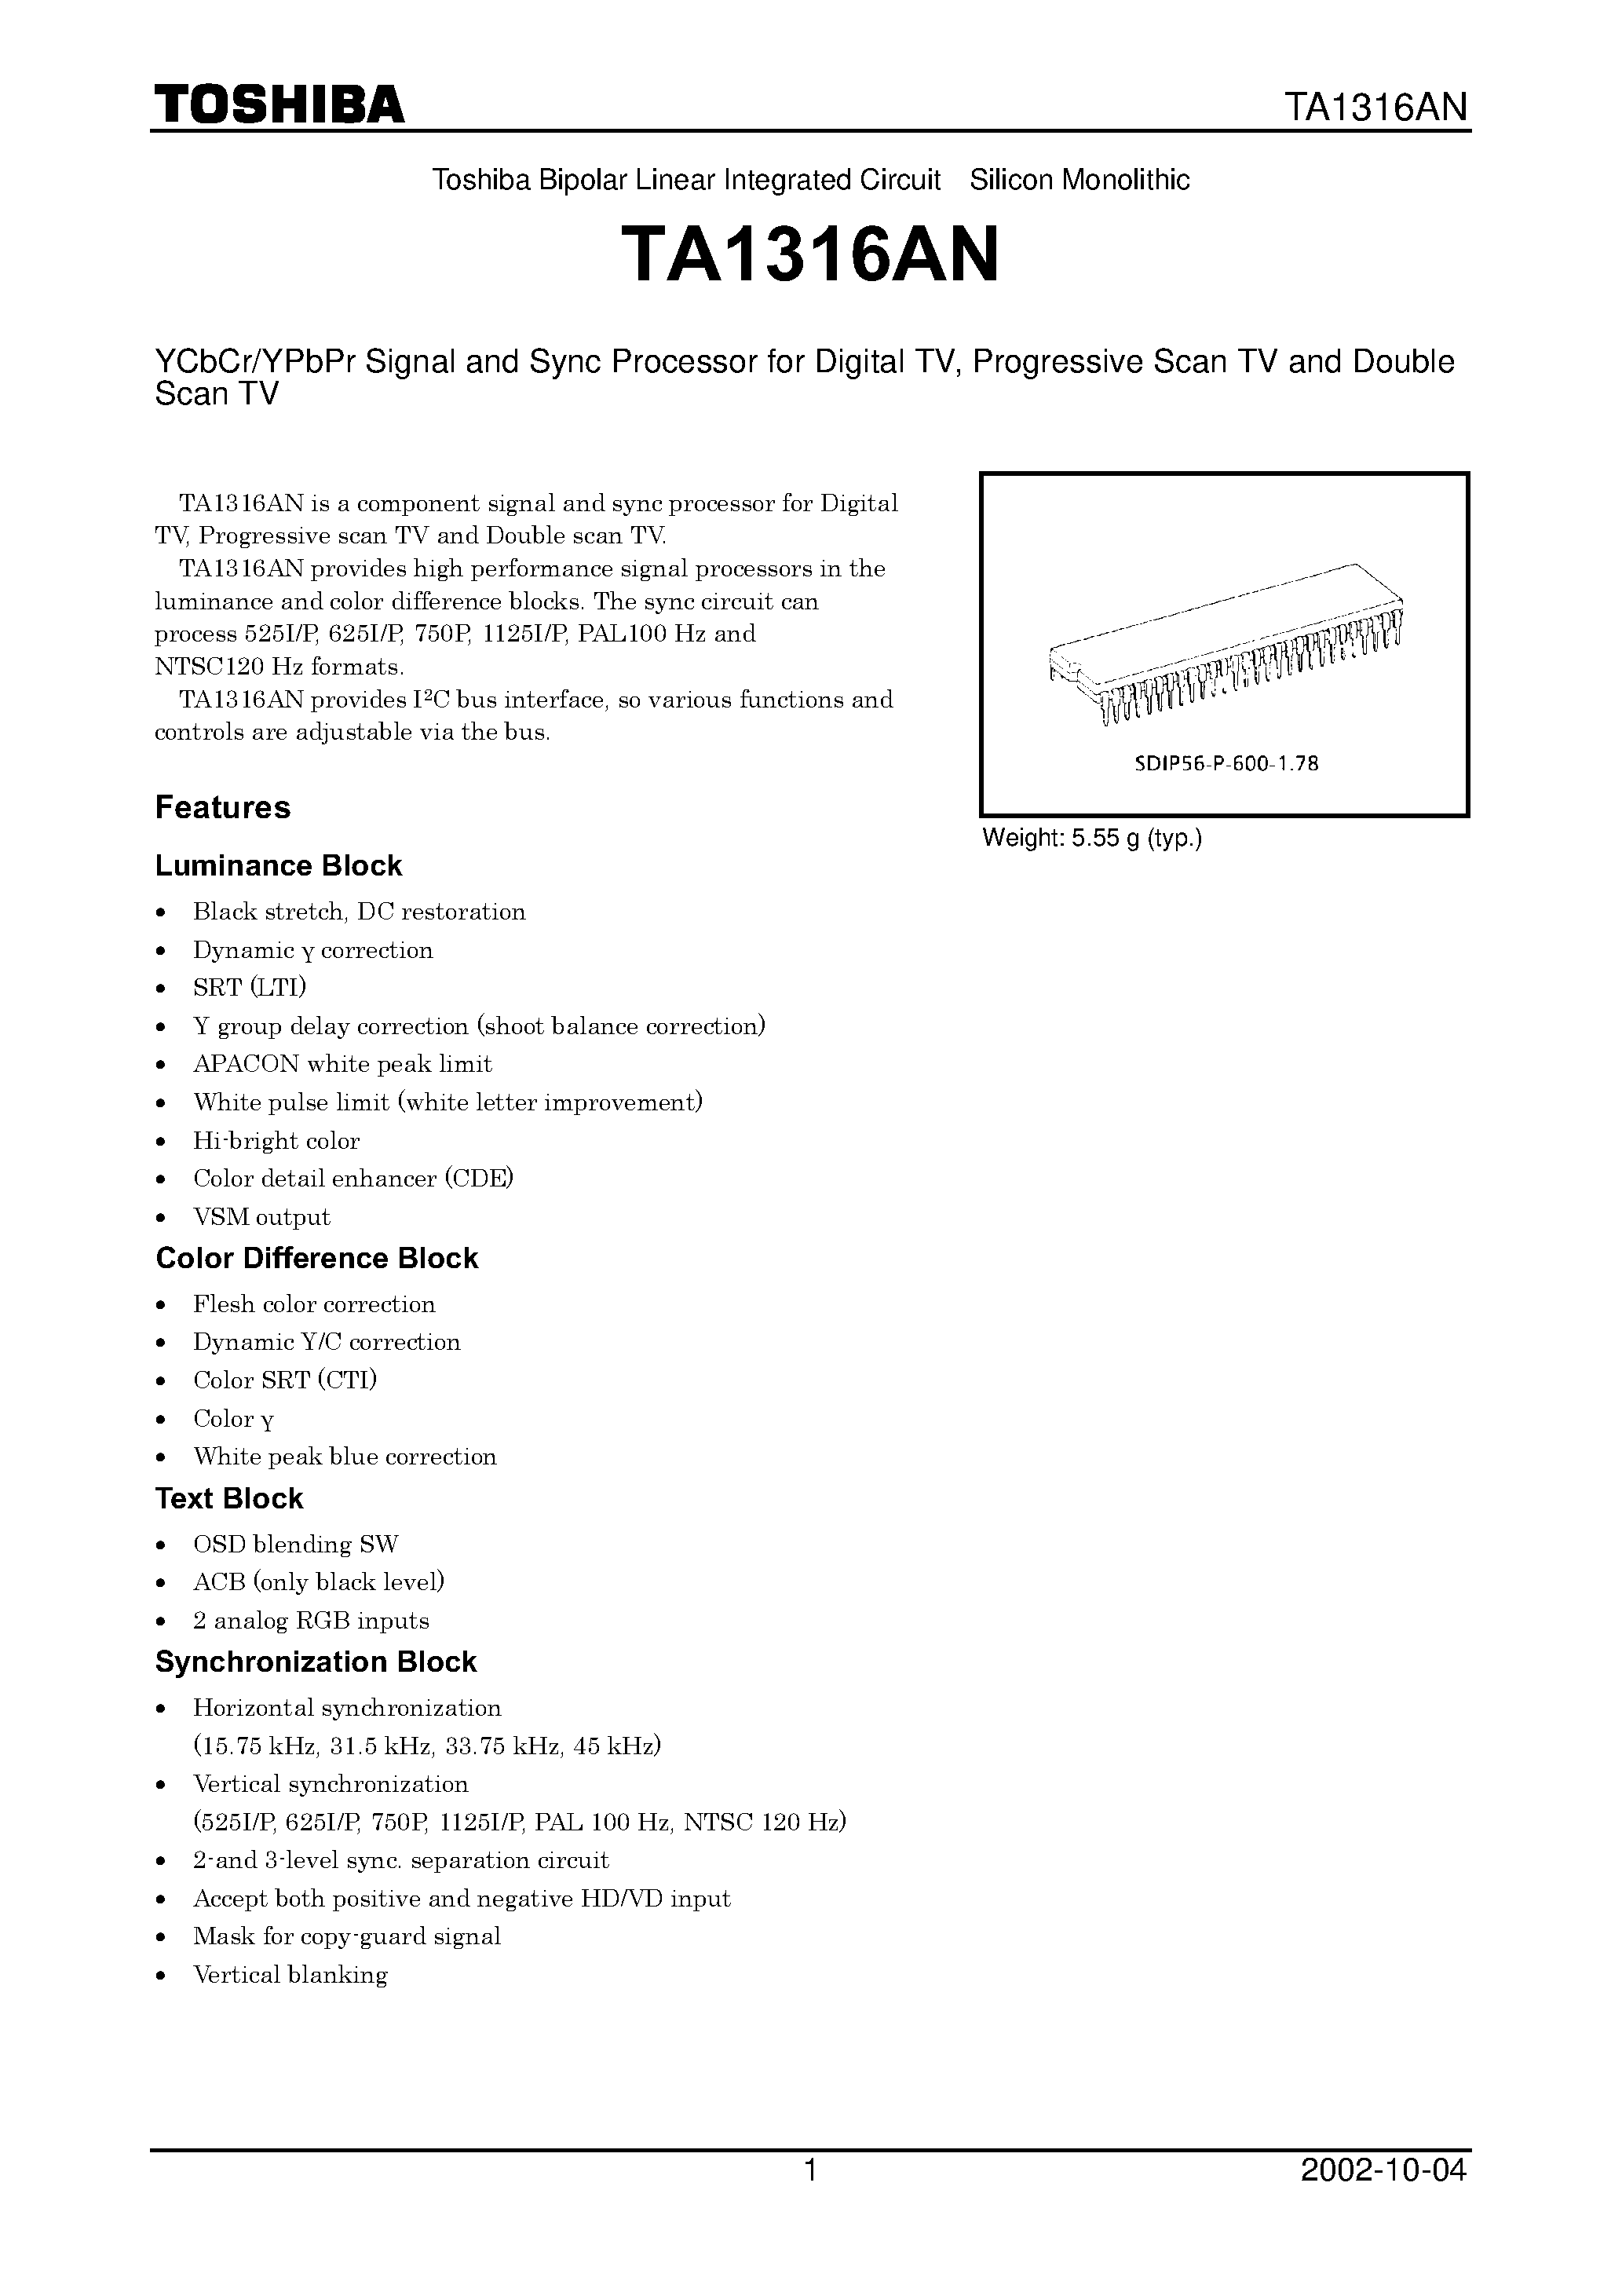 Datasheet TA1316AN - YCbCr/YPbPr Signal and Sync Processor page 1